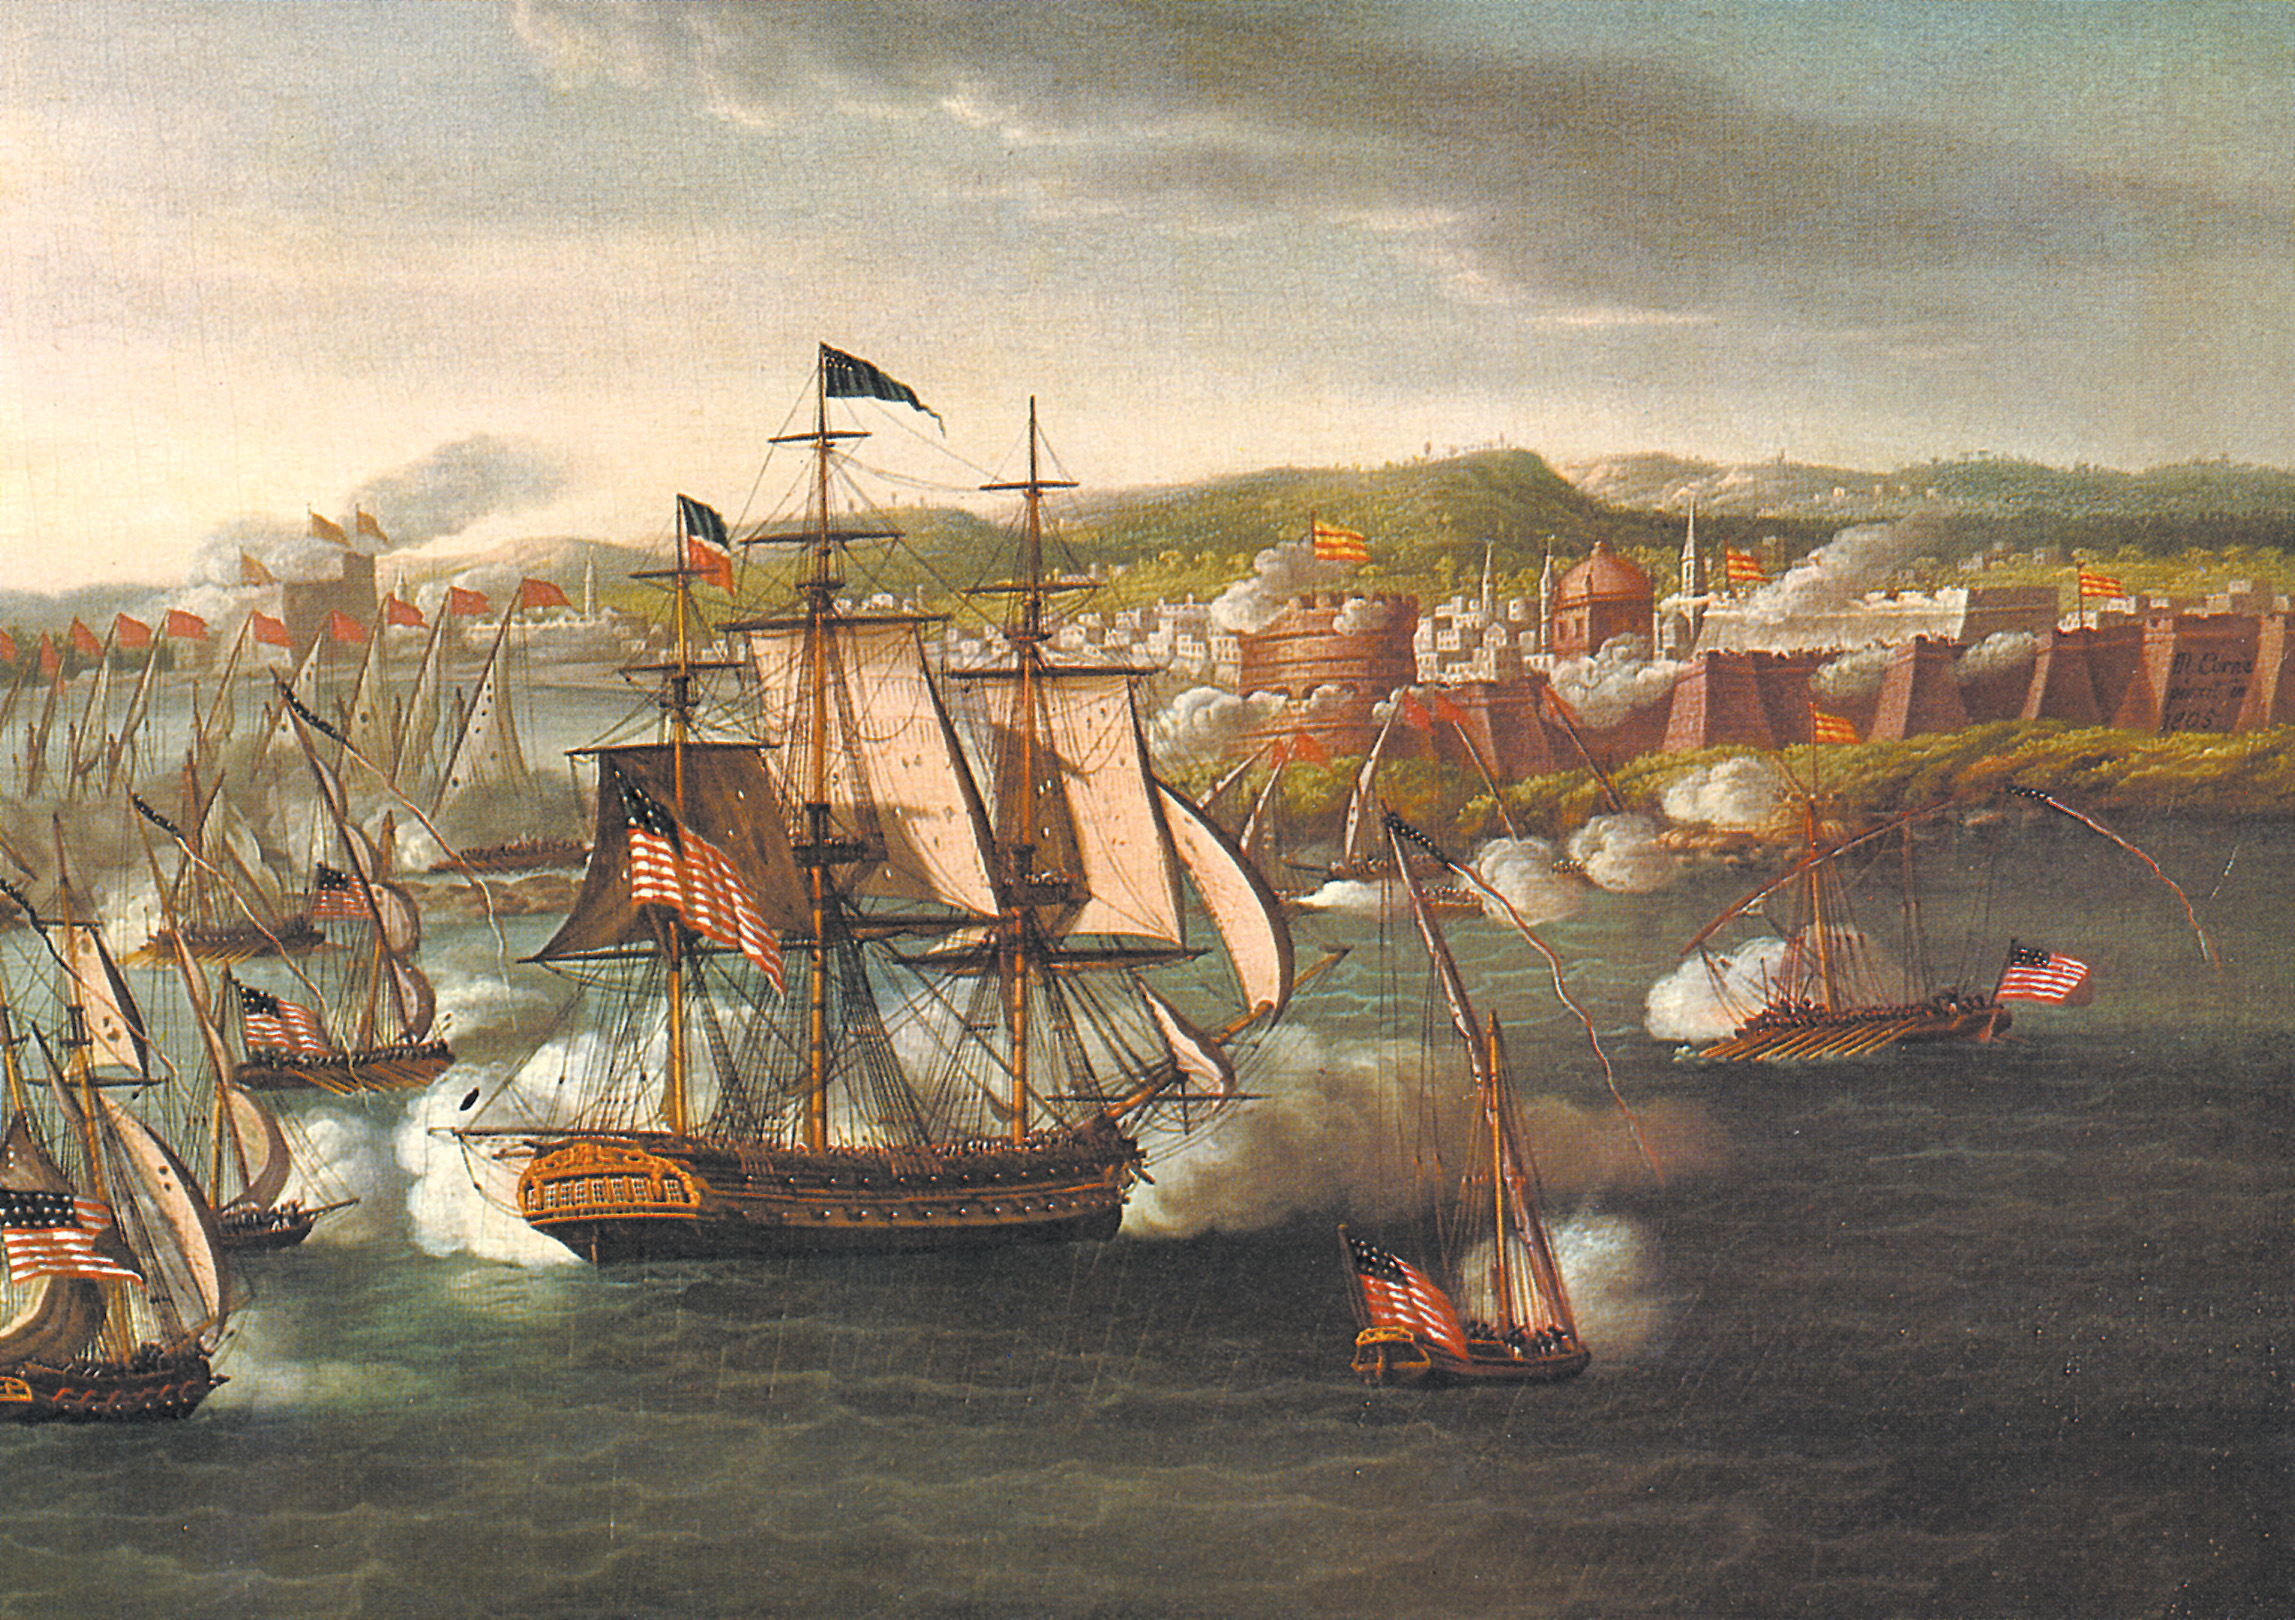 On a mission to free the 307 men taken prisoner from the captured Philadelphia, the USS Constitution, under the command of Commodore Edward Preble blasts the shore batteries in the harbor of Tripoli.